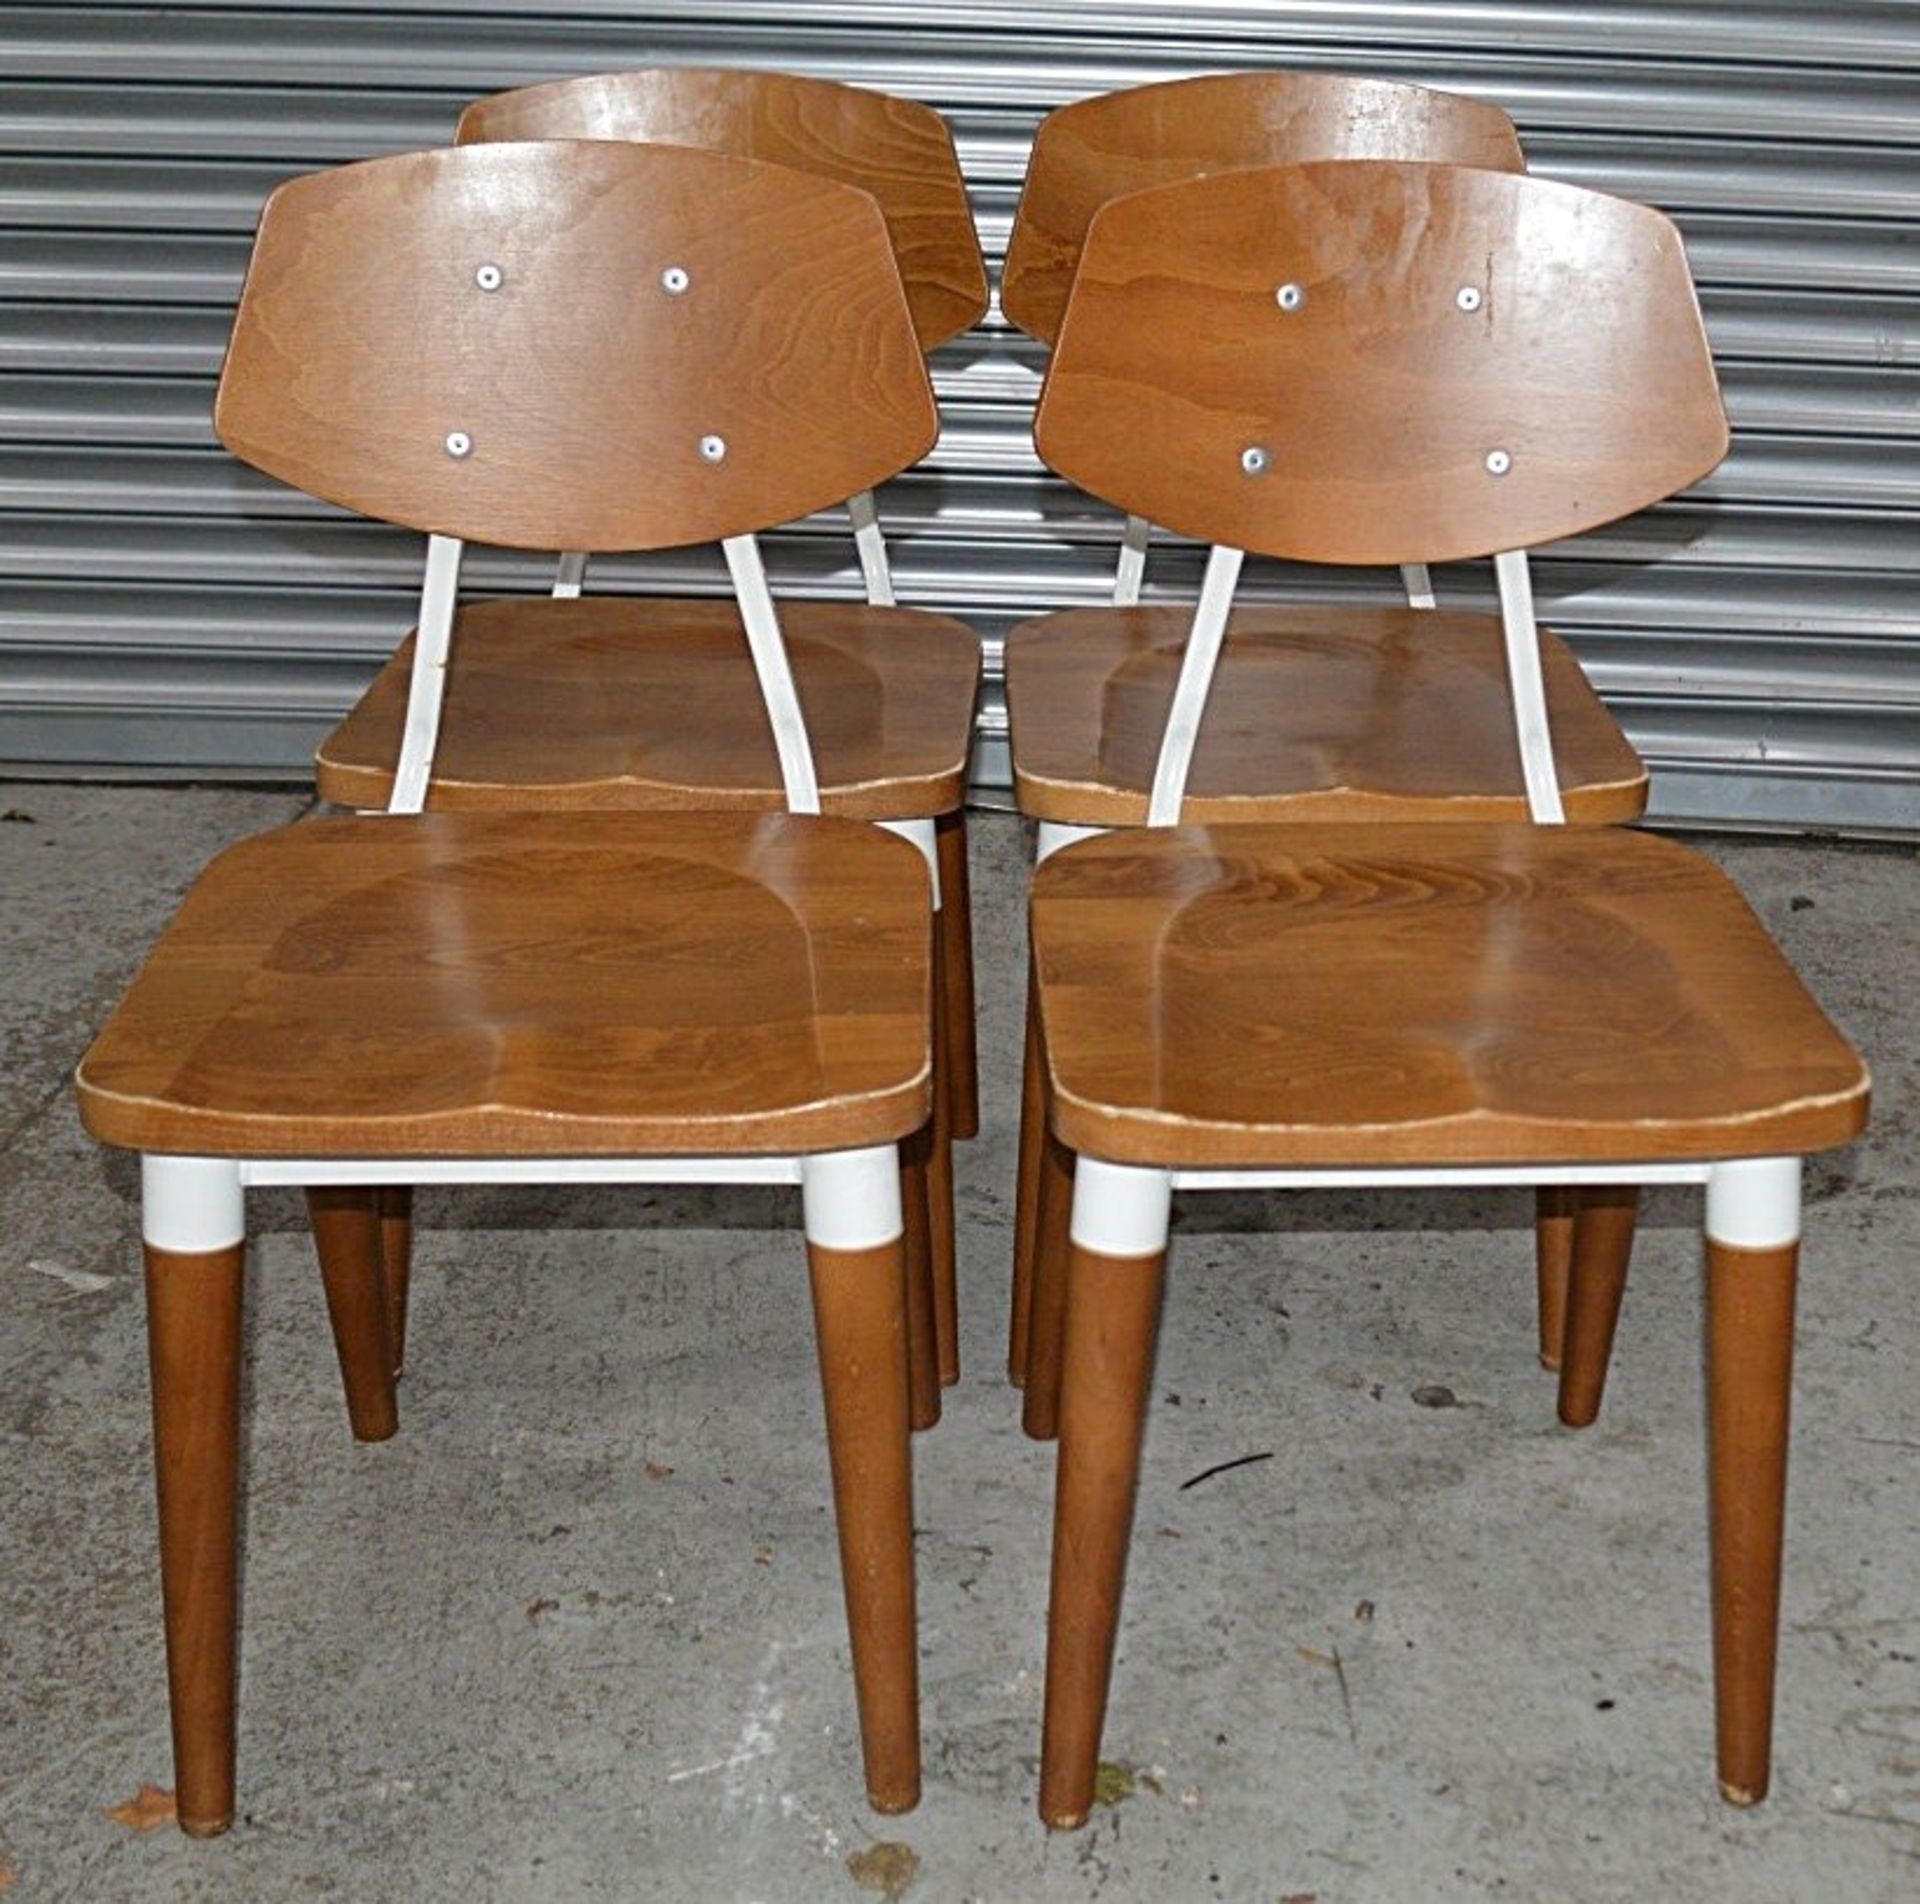 8 x Contemporary Commercial Dining Chairs With A Sturdy Wood And Metal Construction - Image 5 of 10